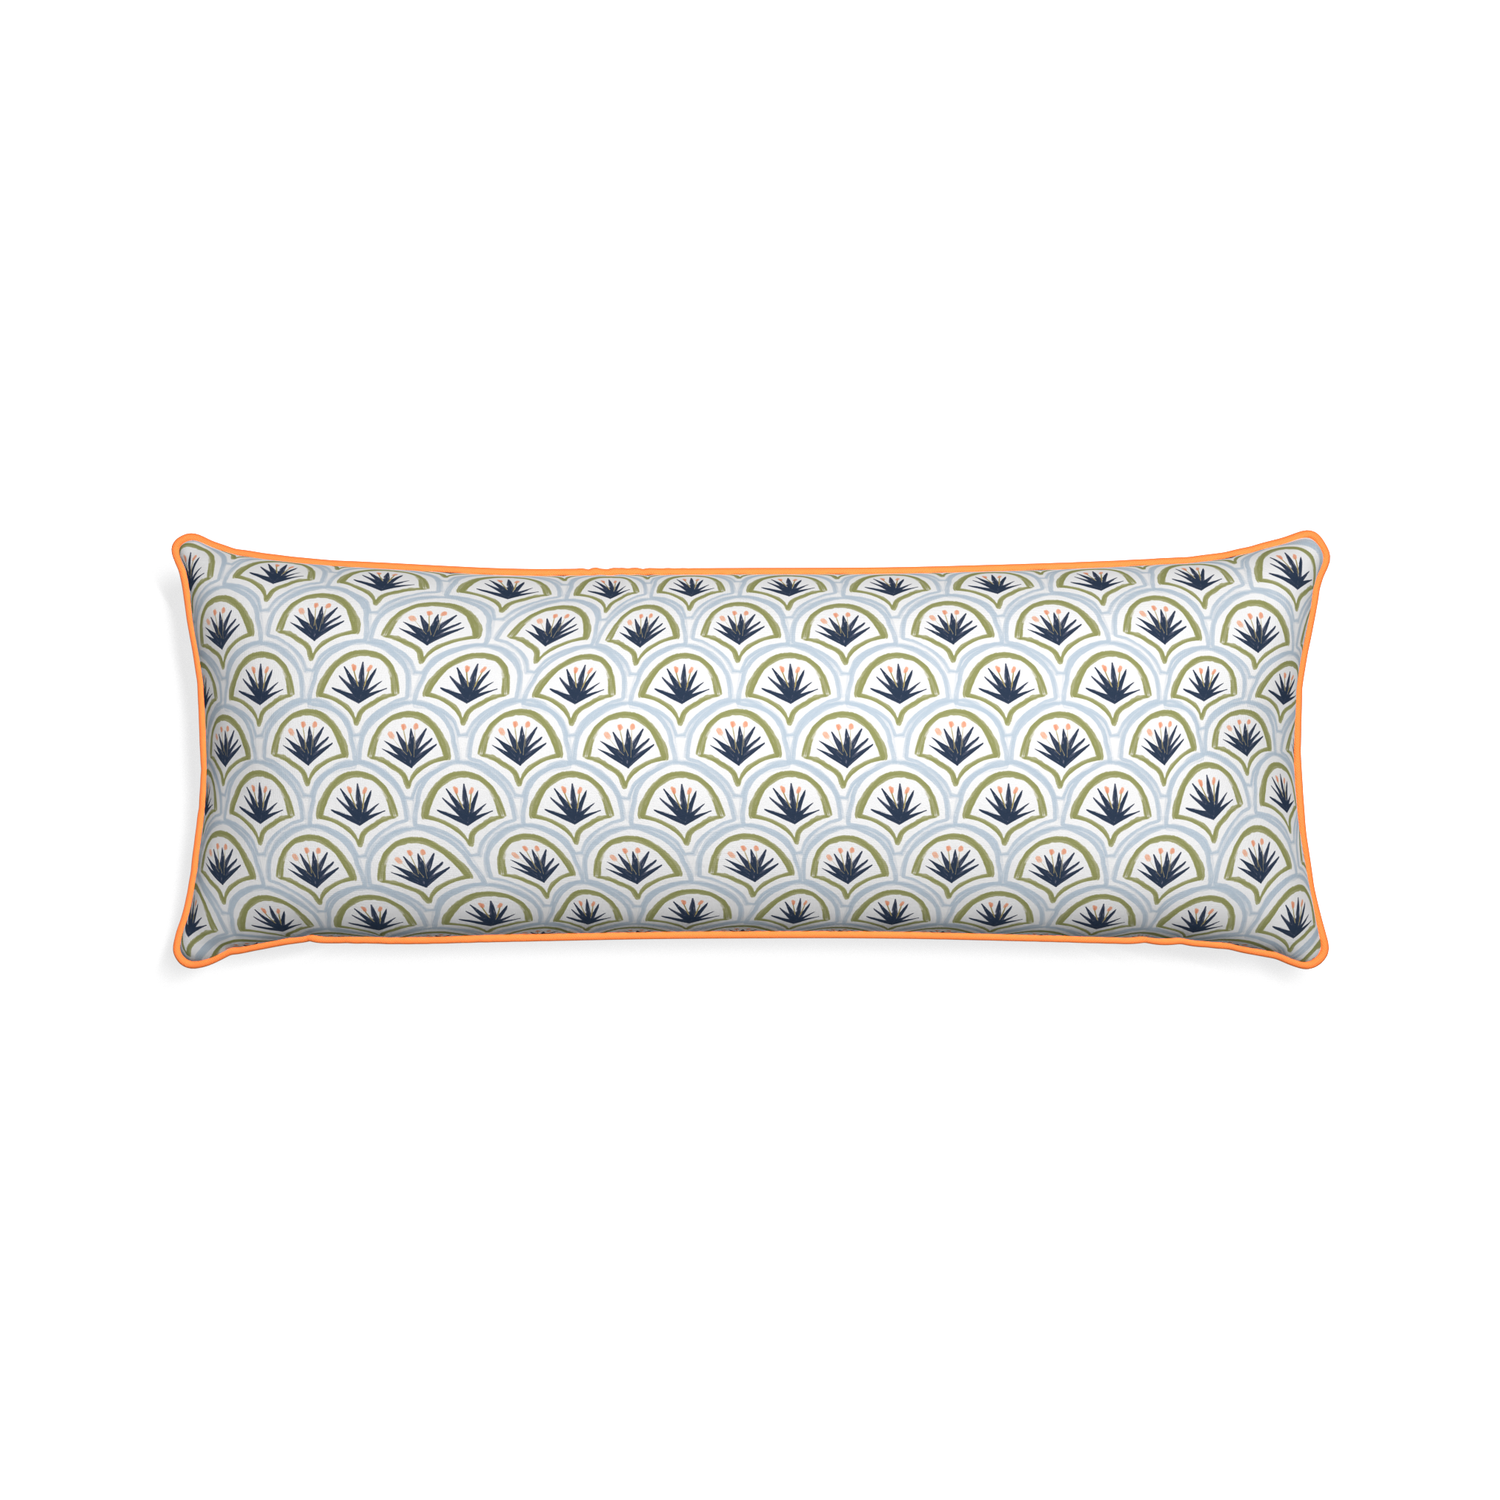 Xl-lumbar thatcher midnight custom art deco palm patternpillow with clementine piping on white background